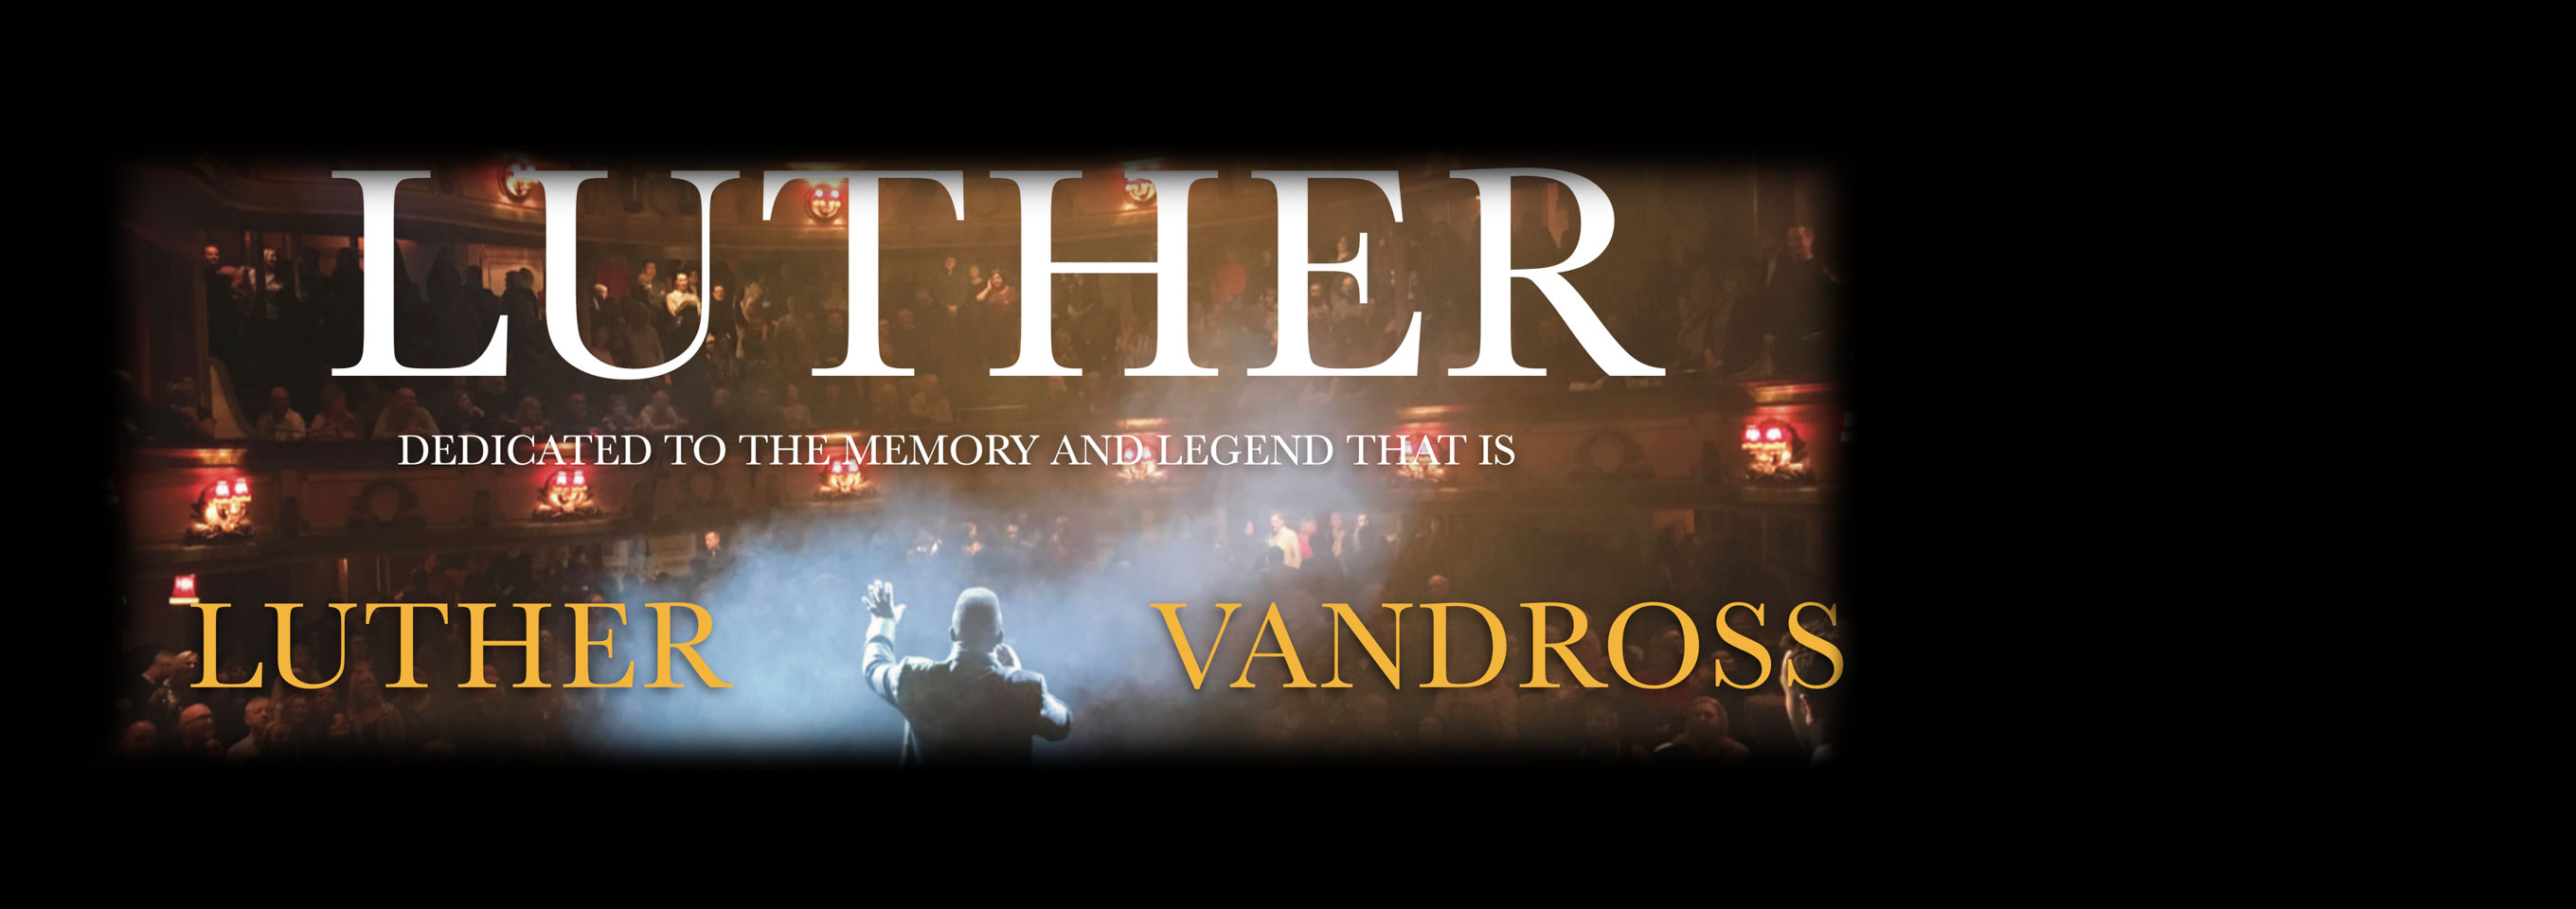 A Luther Vandross Celebration hero image